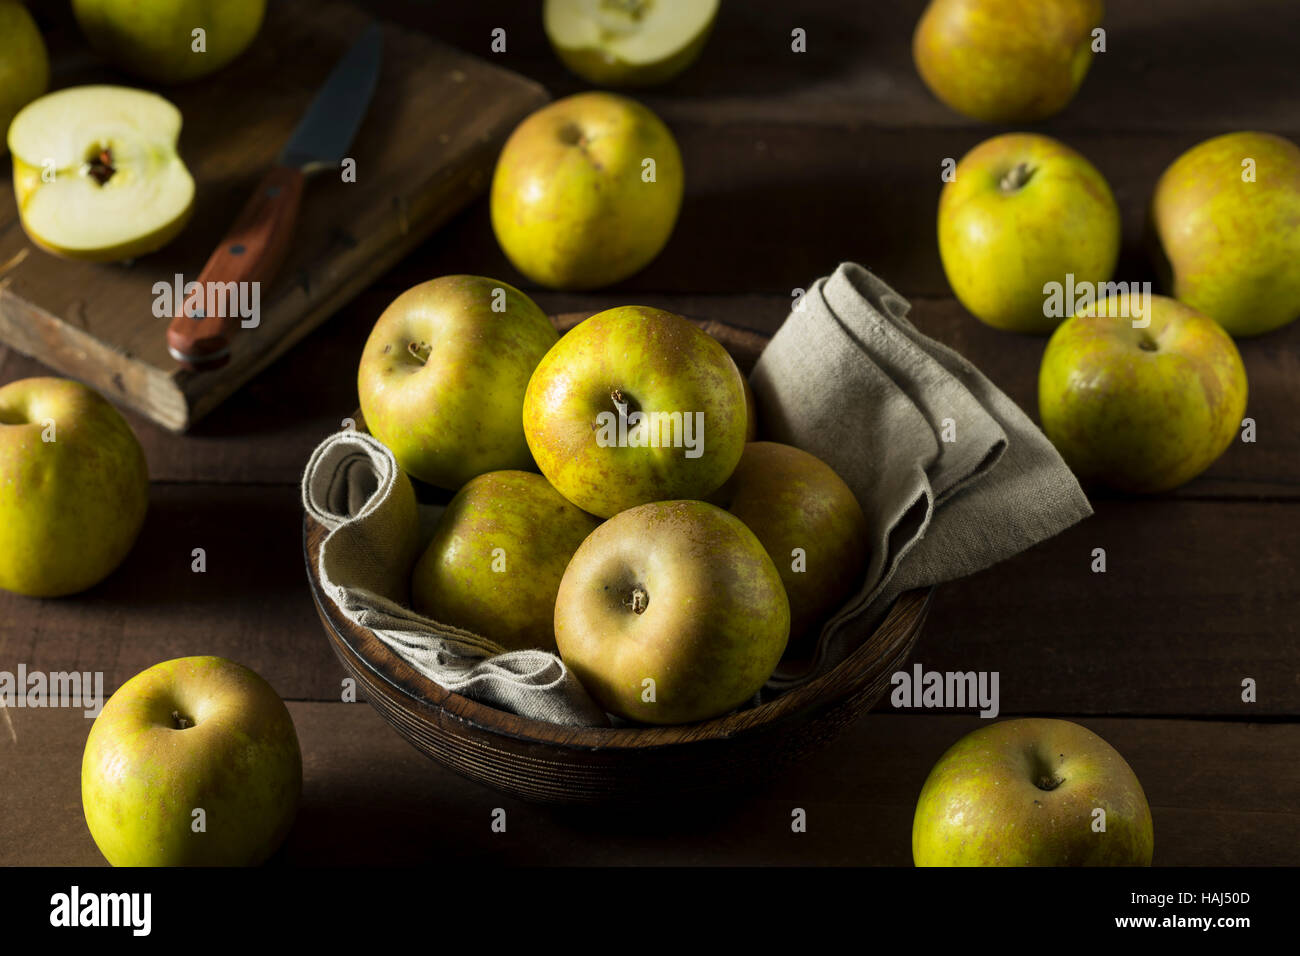 Raw Organic Heirloom Golden Russet Apples Ready to Eat Stock Photo